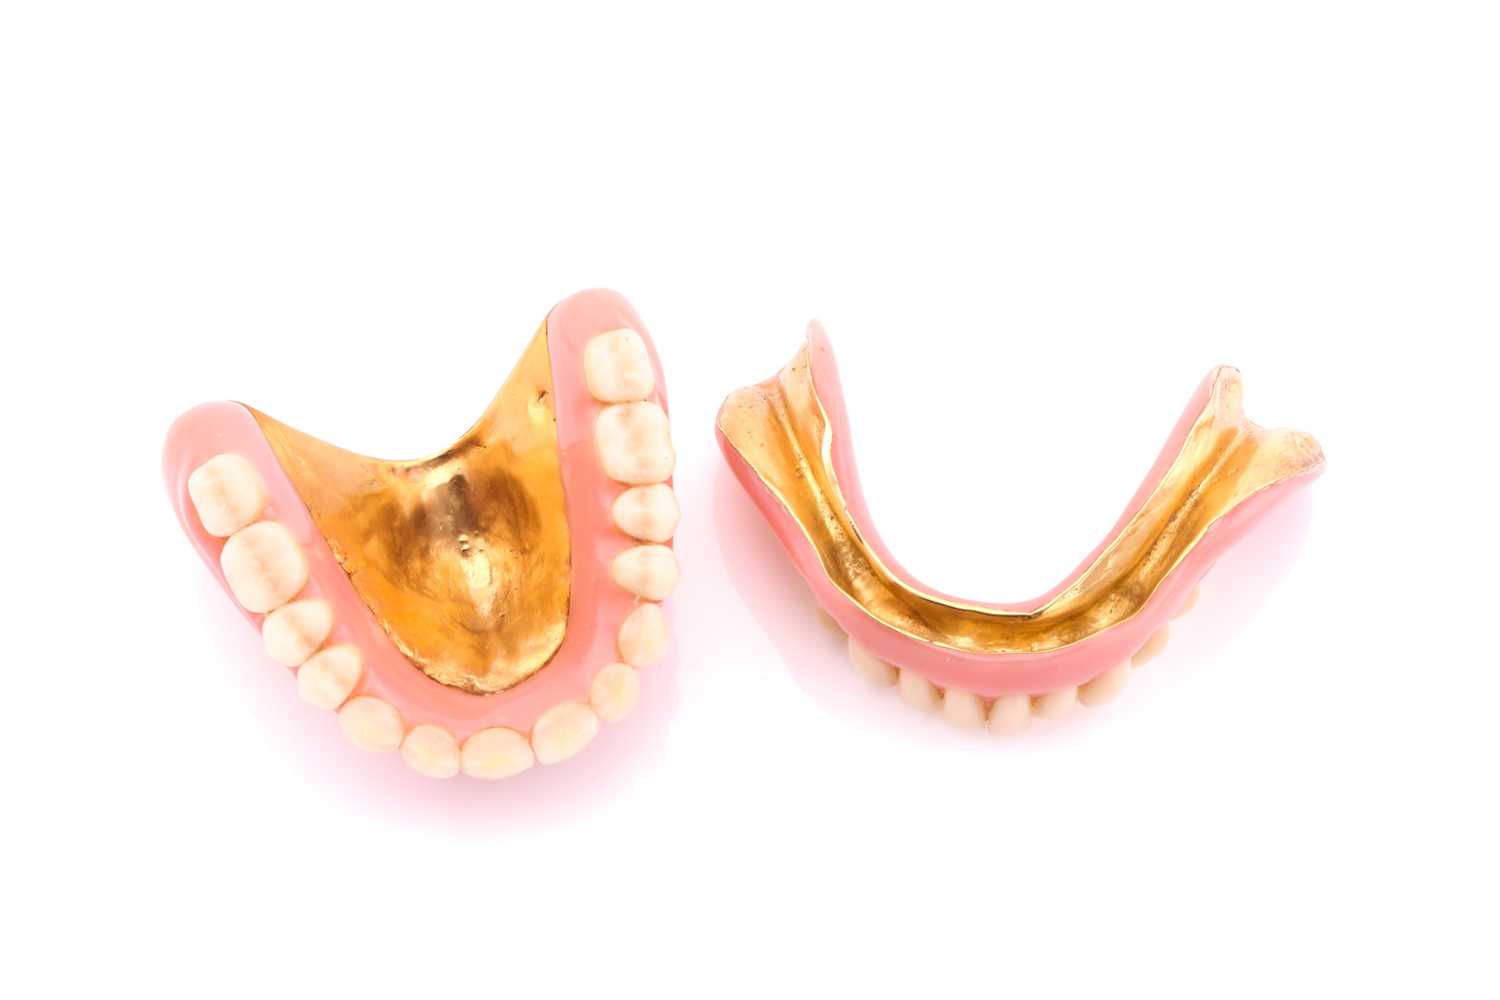 Pair of false teeth with gold content, 53.8 grams all inCondition report: Tested as 18k gold plus - Image 5 of 5